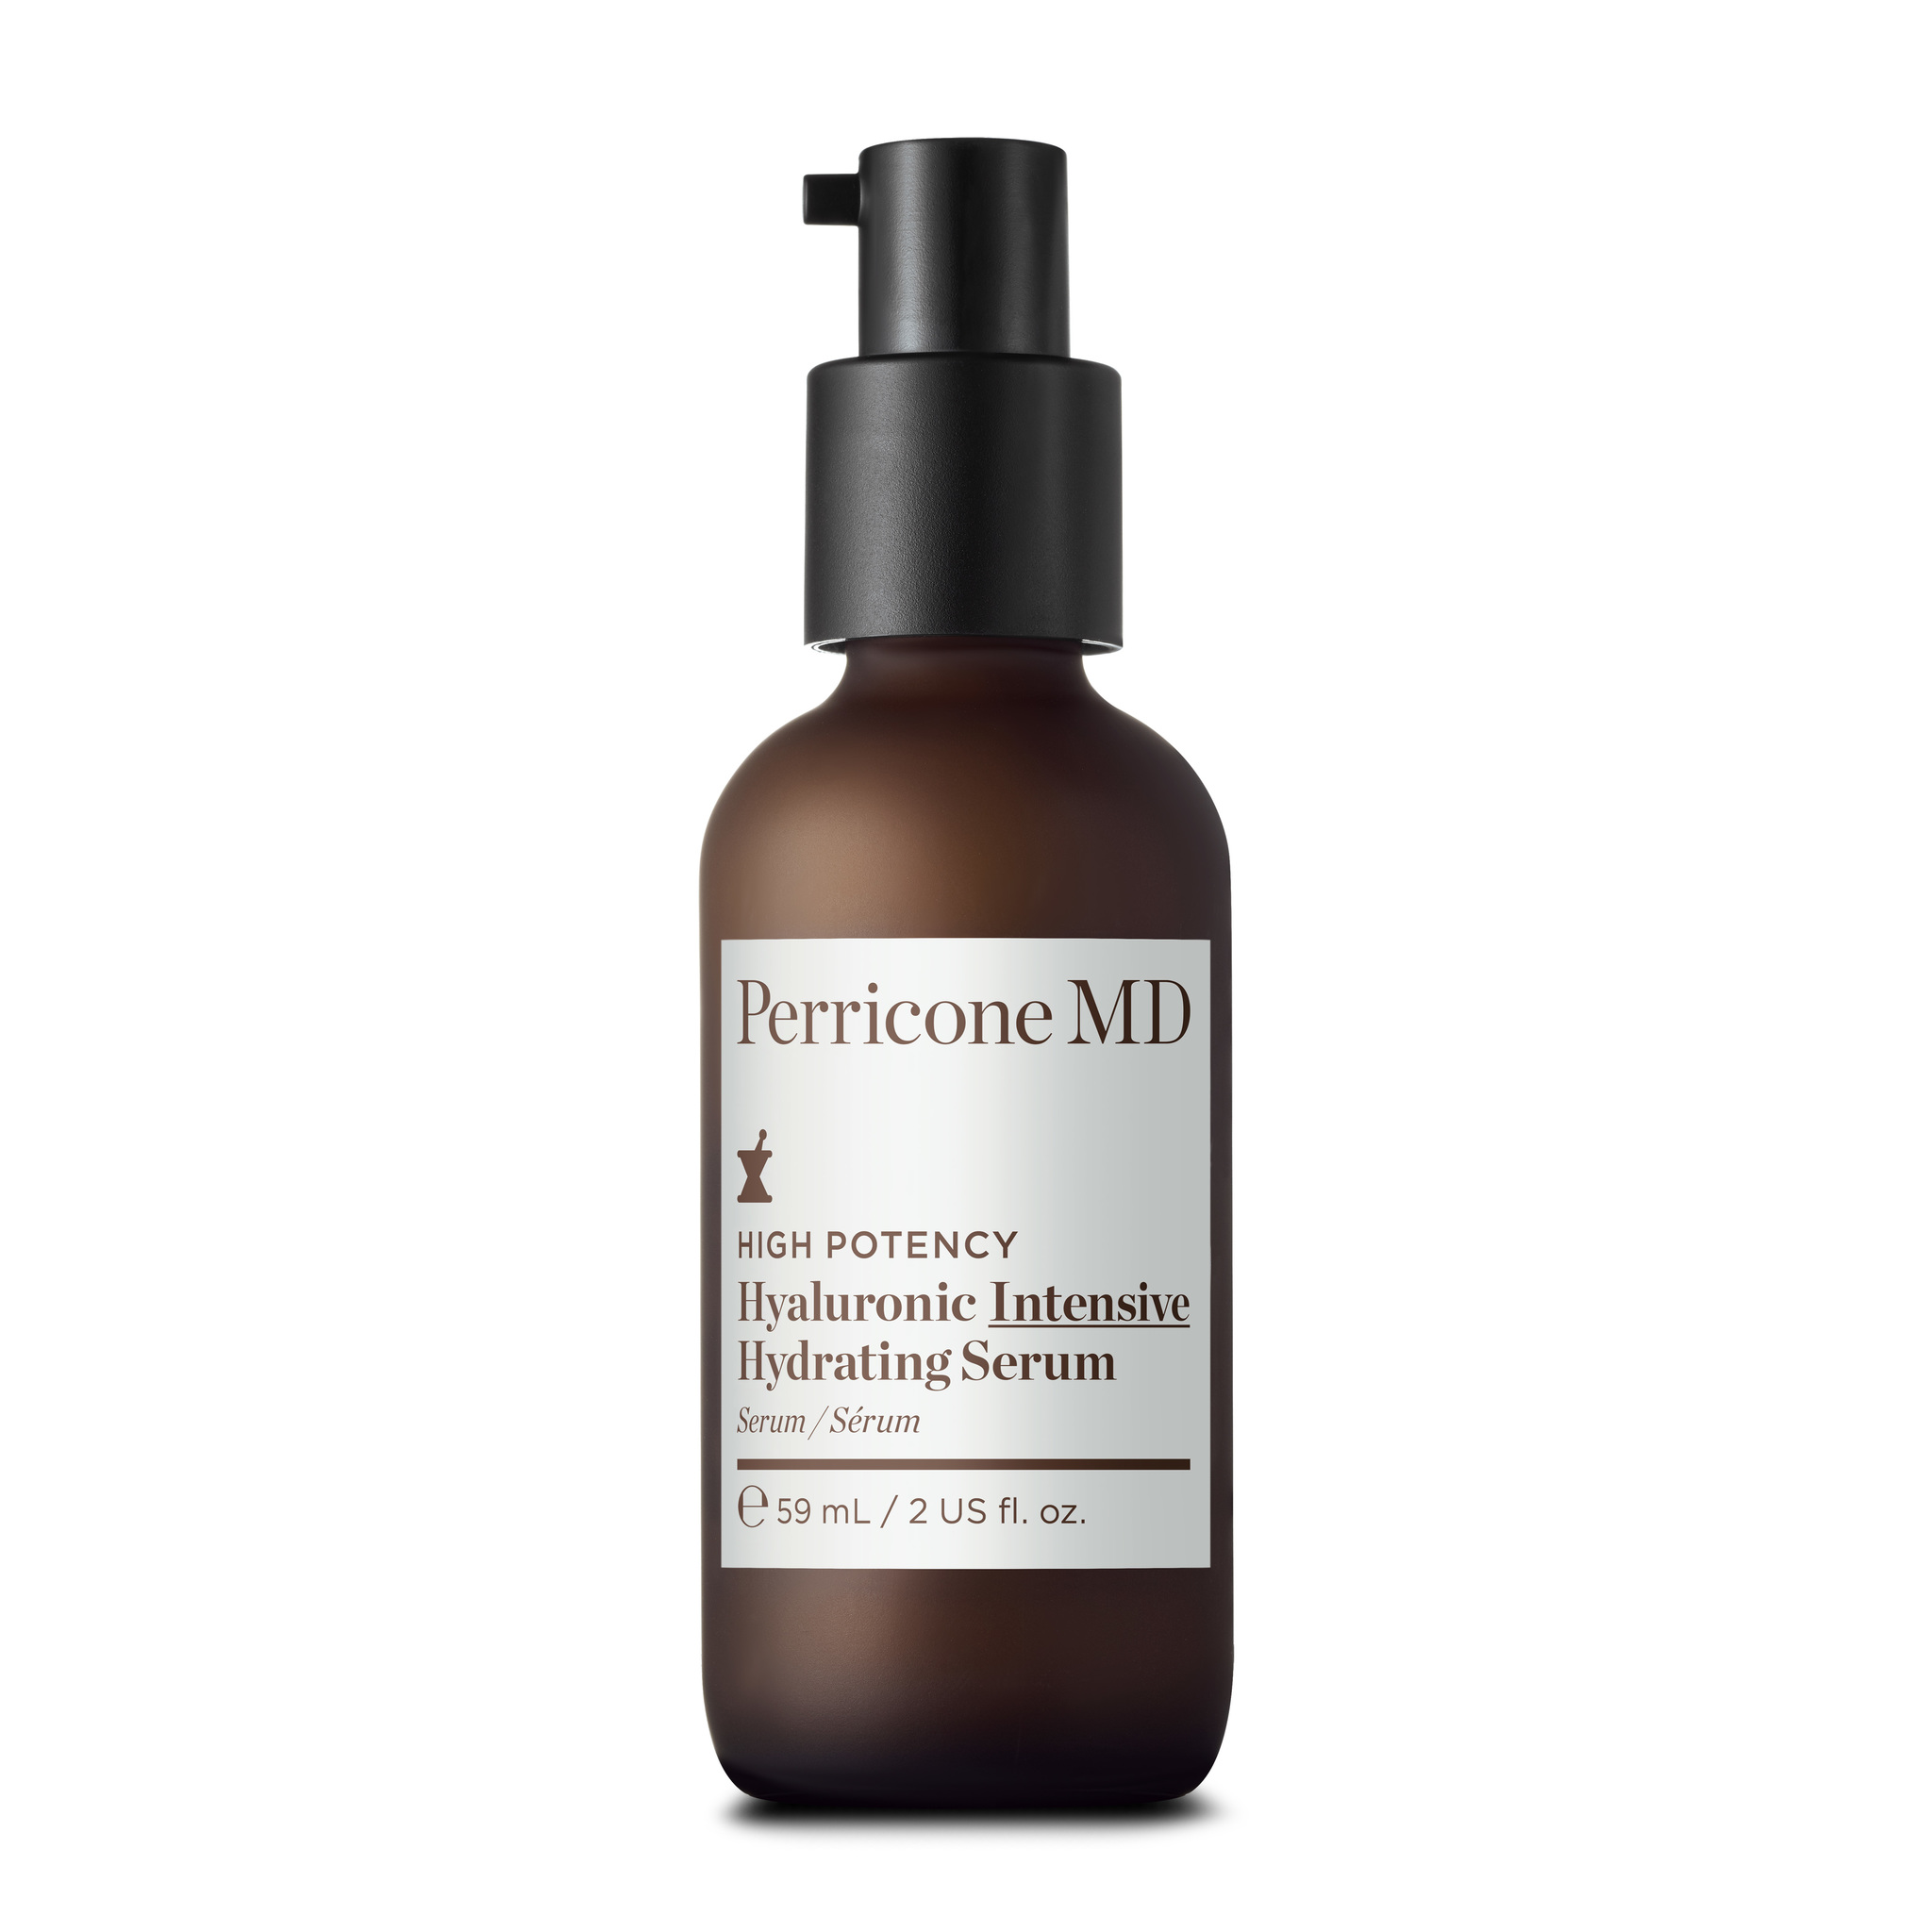 Hyaluronic Intensive Hydrating Serum, de Perricone MD